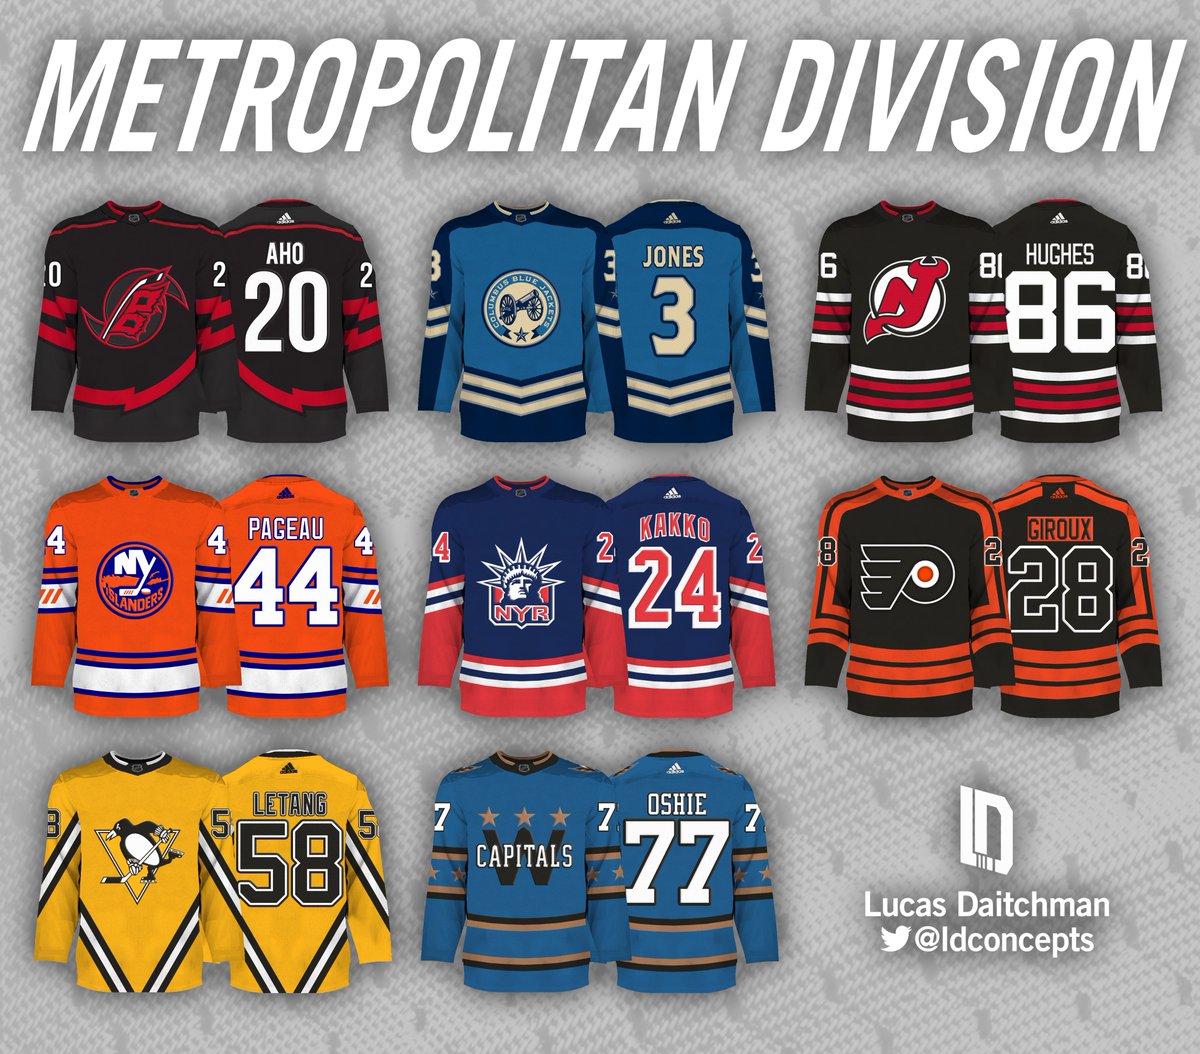 Lucas Daitchman on X: 2022 #WinterClassic jersey predictions after  Minnesota's teaser image release today. I based their jersey off the old  Millers franchise and @RussoHockey's description, while the Blues get a  vintage